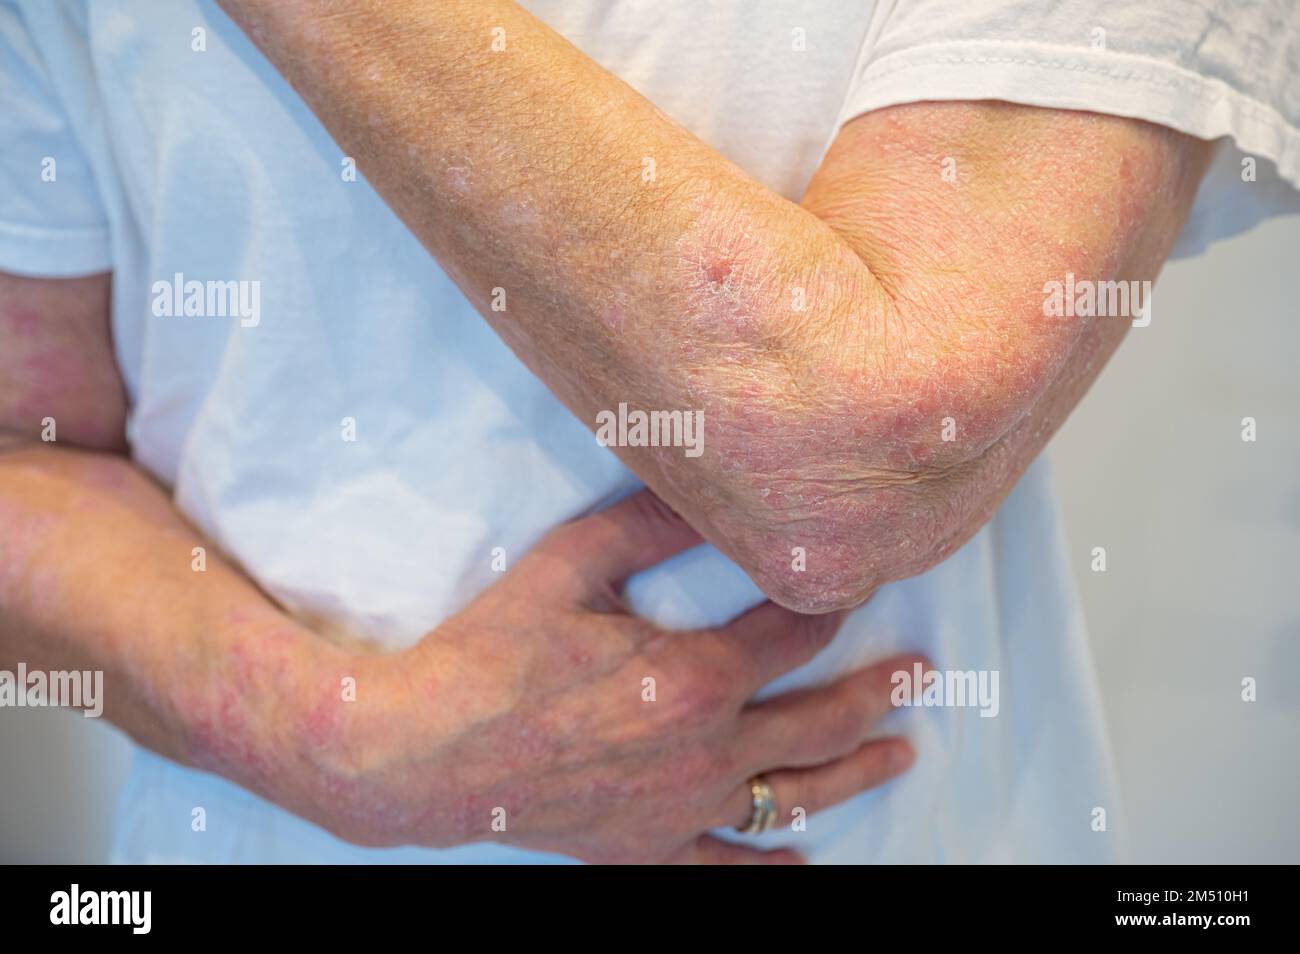 Skin disease psoriasis on arm and hand Stock Photo